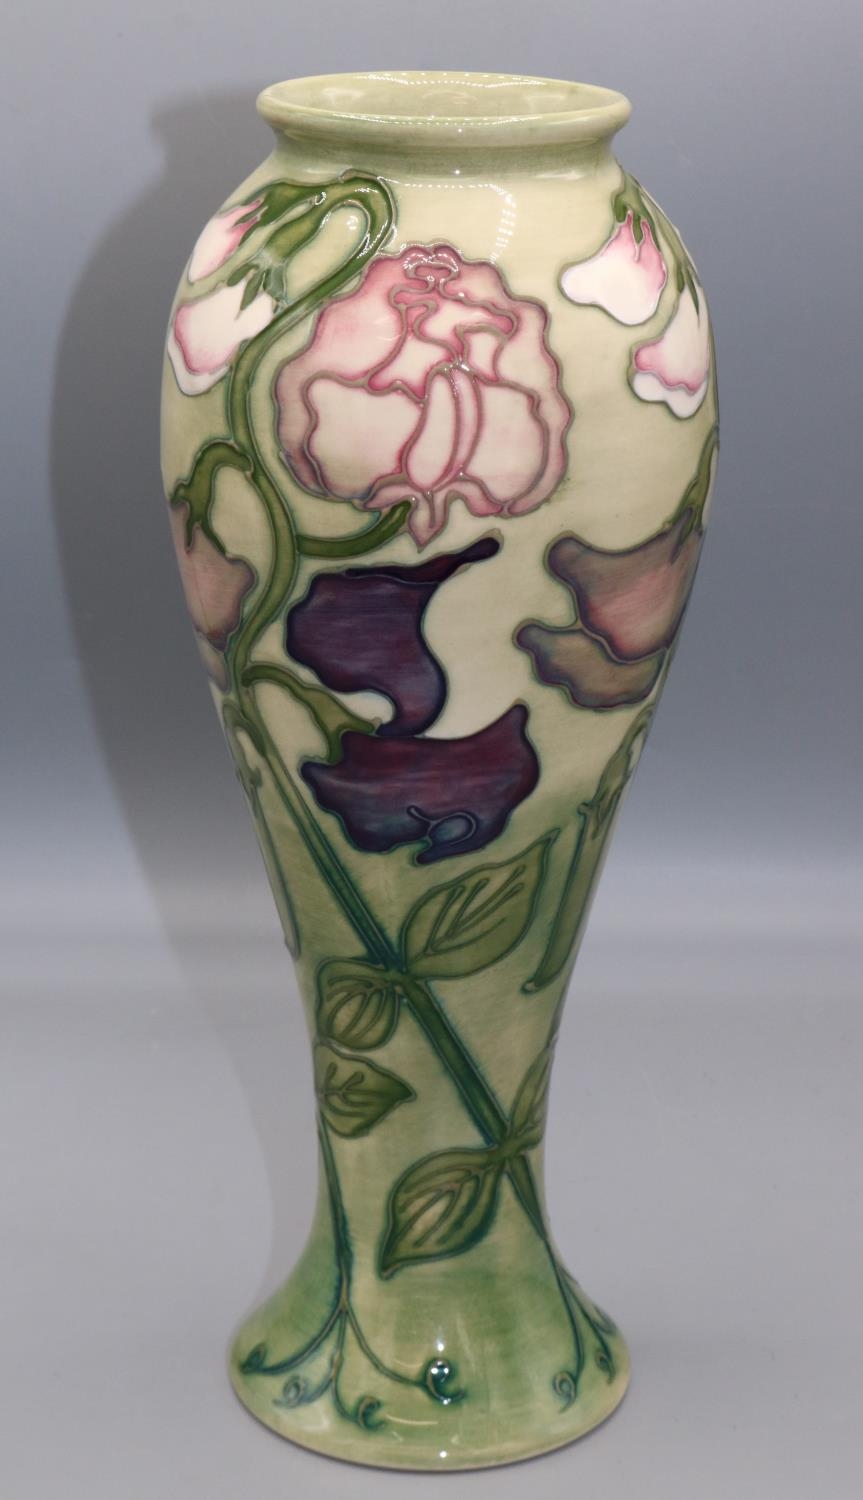 Moorcroft Pottery: 'Sweet Pea' vase designed by Sally Tuffin for M.C.C. c1992, pink and purple